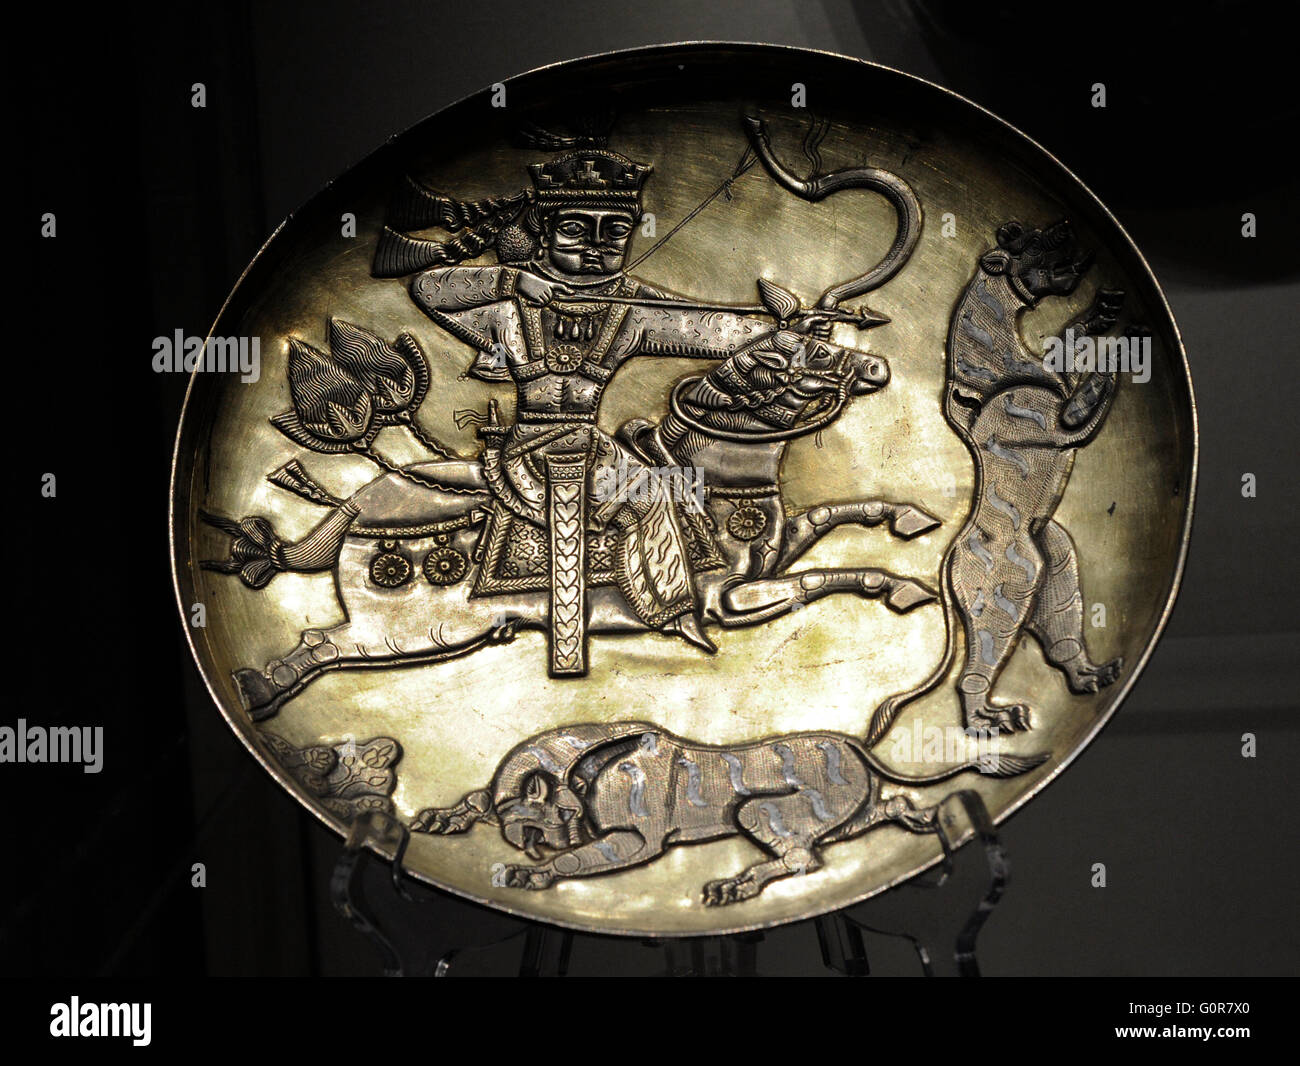 Sasanian Empire. Plate with the king hunting predators. Silver; chasing, gilding. Iran. 7th century. Found as part of a treasure in Perm Region. The State Hermitage Museum. Saint Petersburg. Russia. Stock Photo